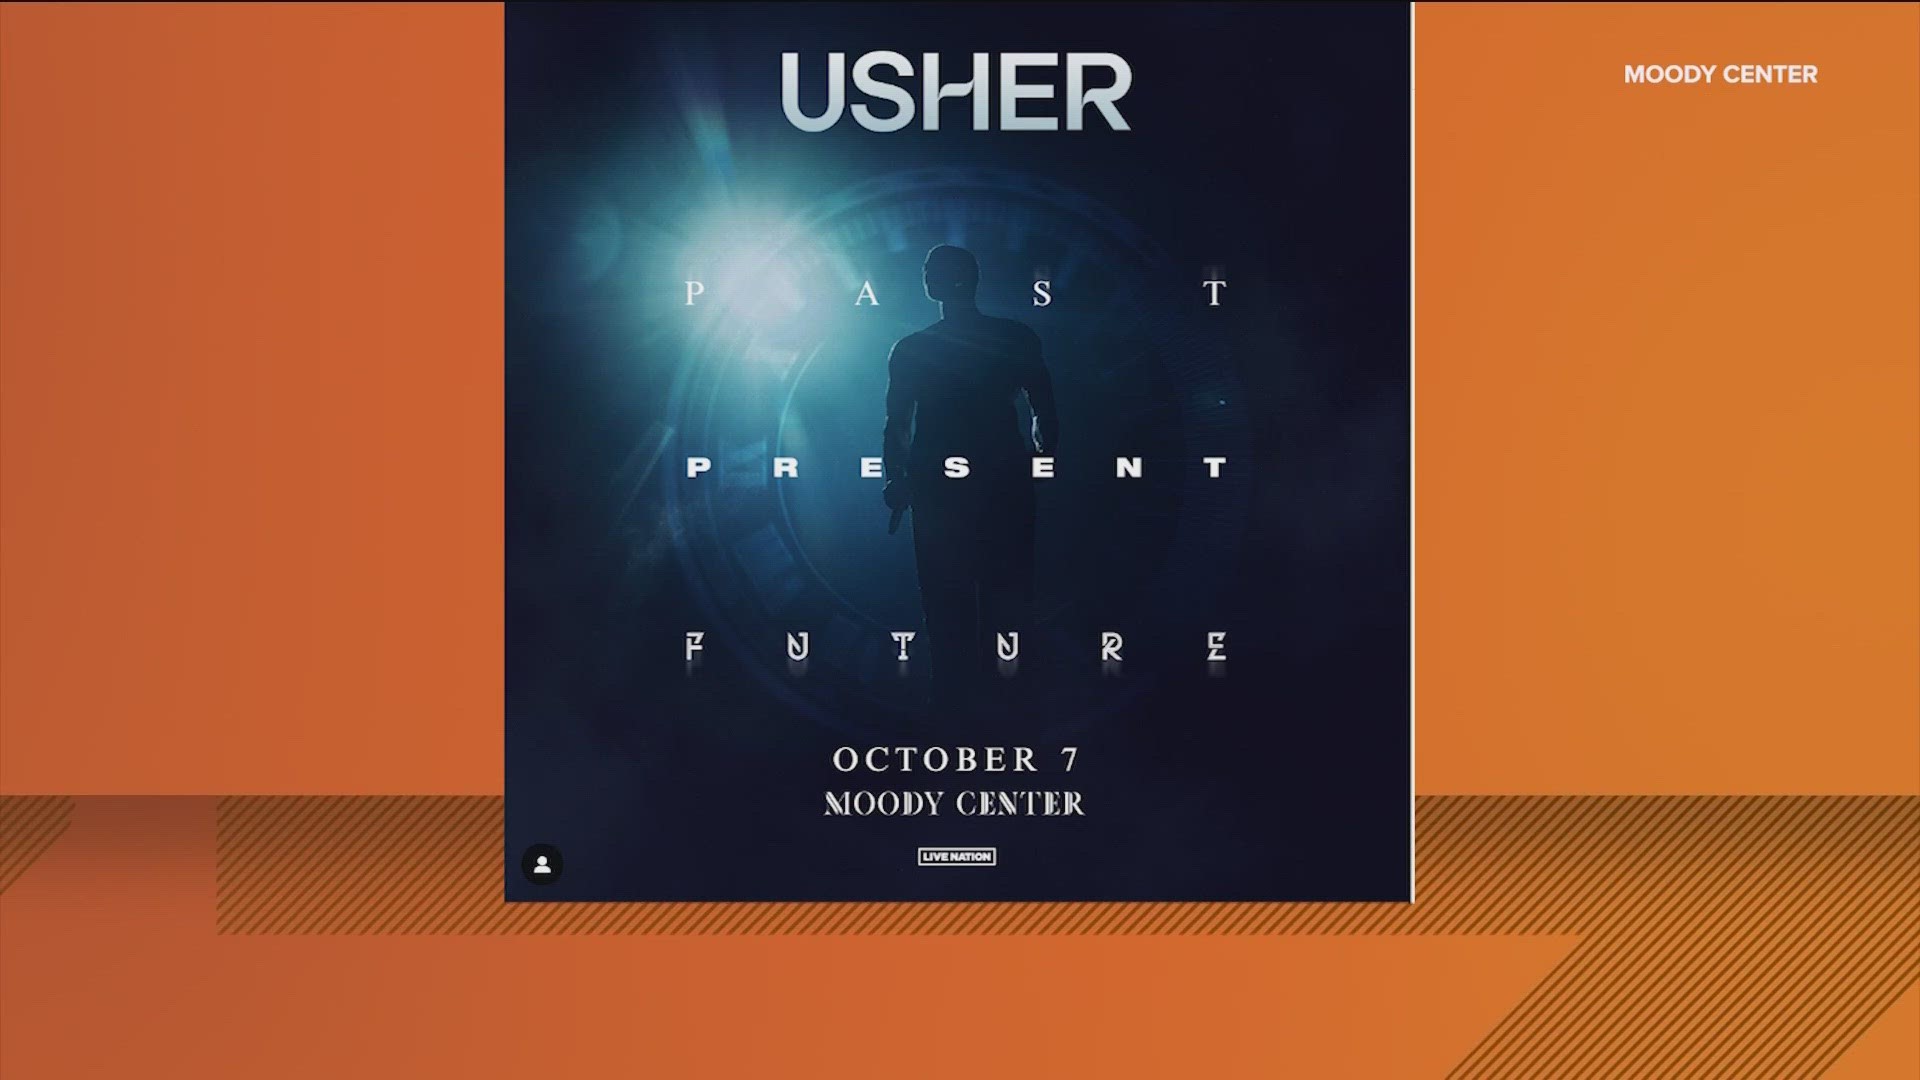 You don't have to attend the Super Bowl to see Usher this year. The R&B superstar is making a stop at Austin's Moody Center in October.